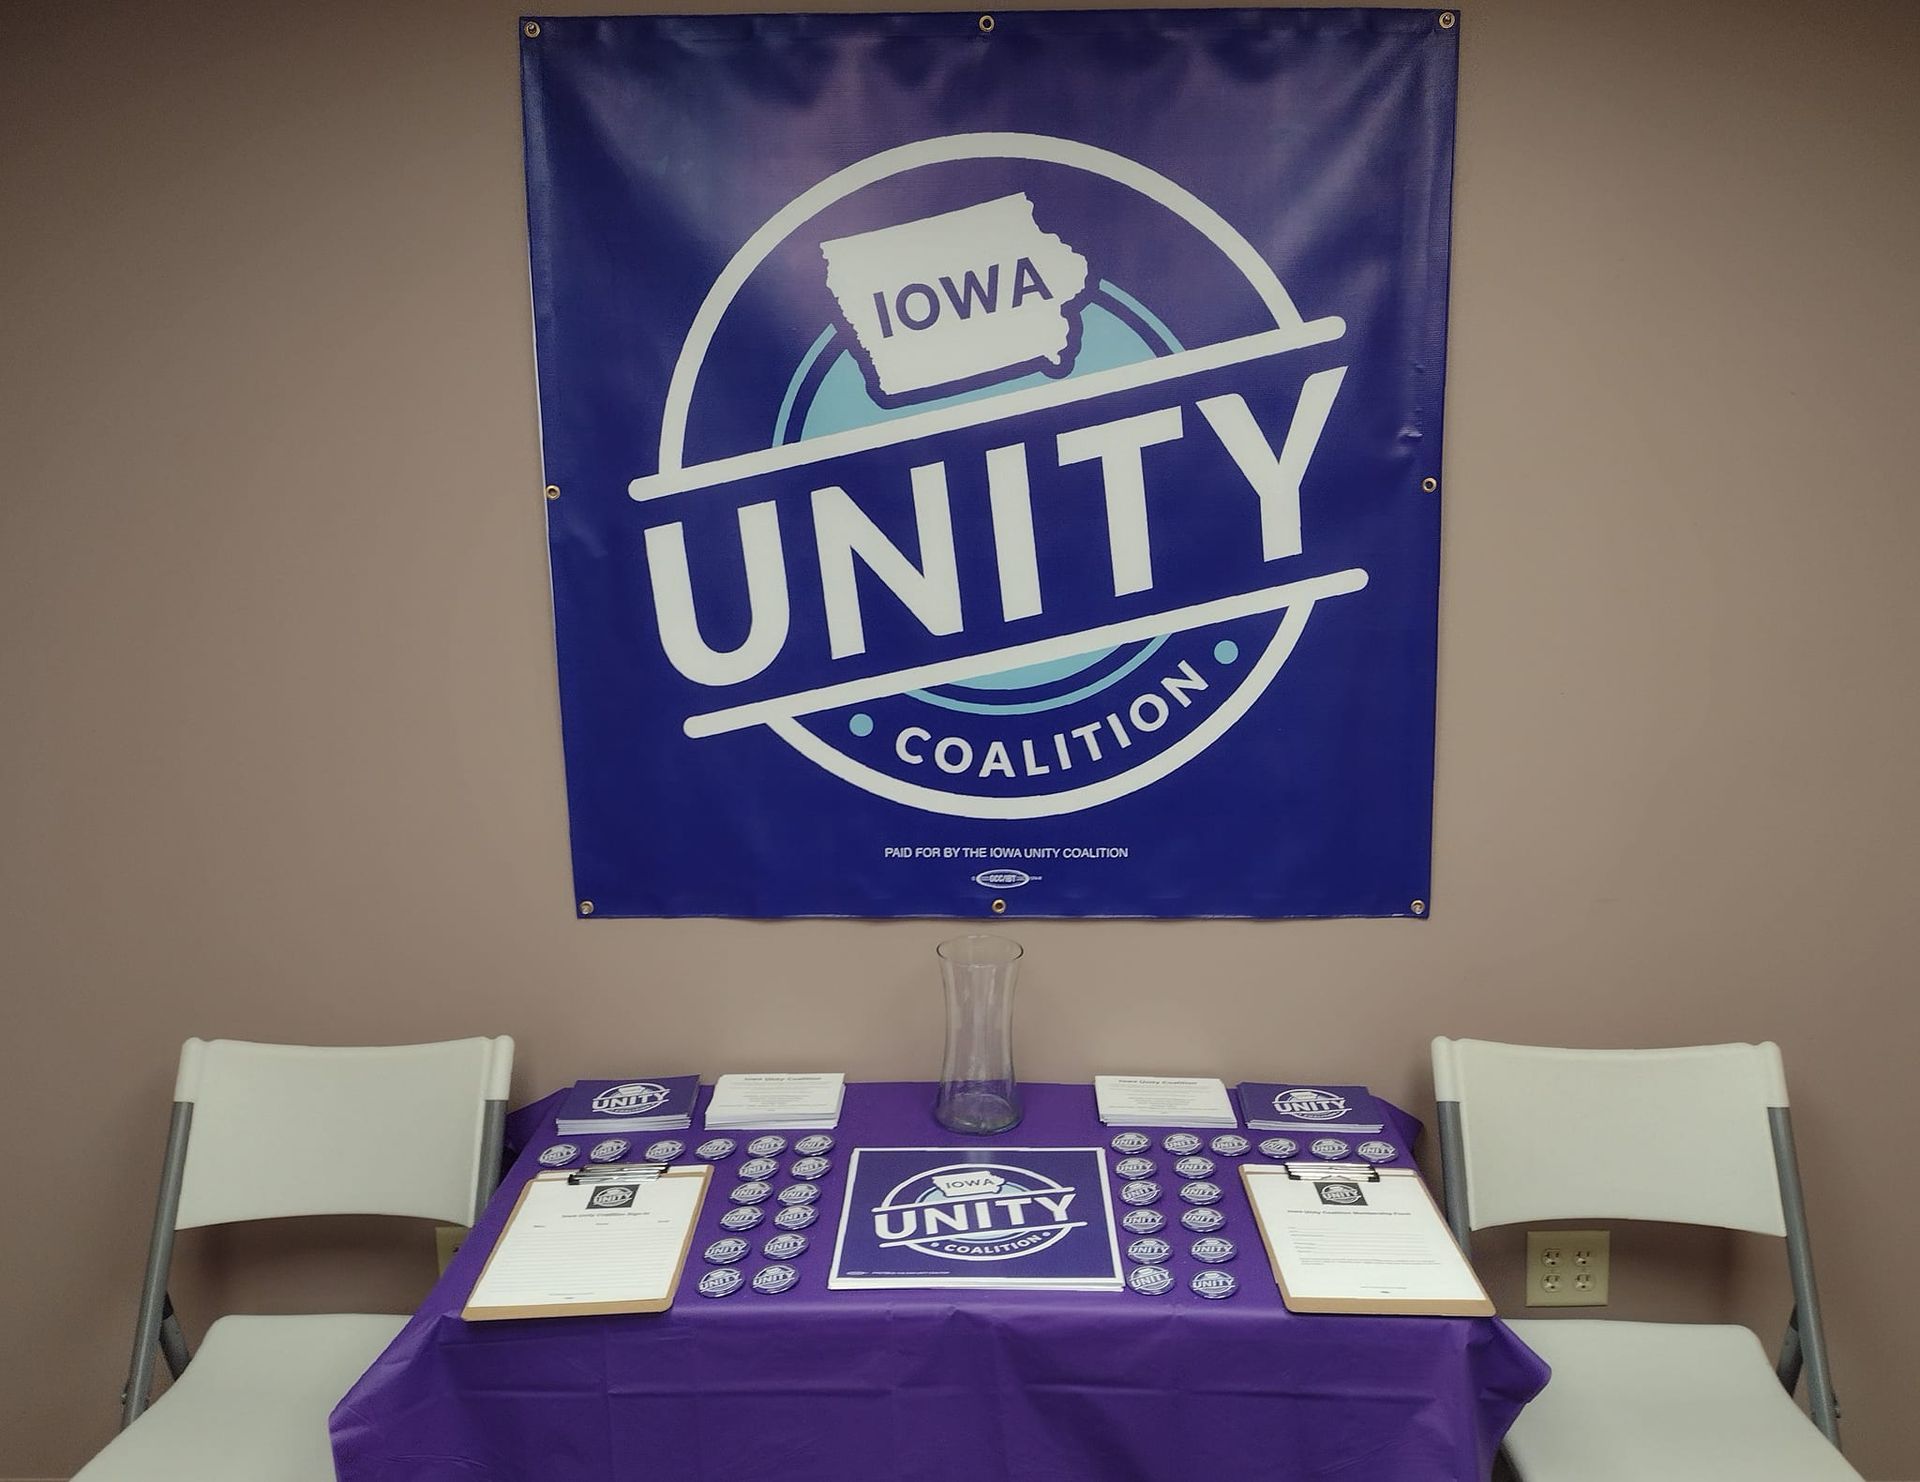 a table with sign-in and buttons, stickers, and forms for Iowa Unity Coalition